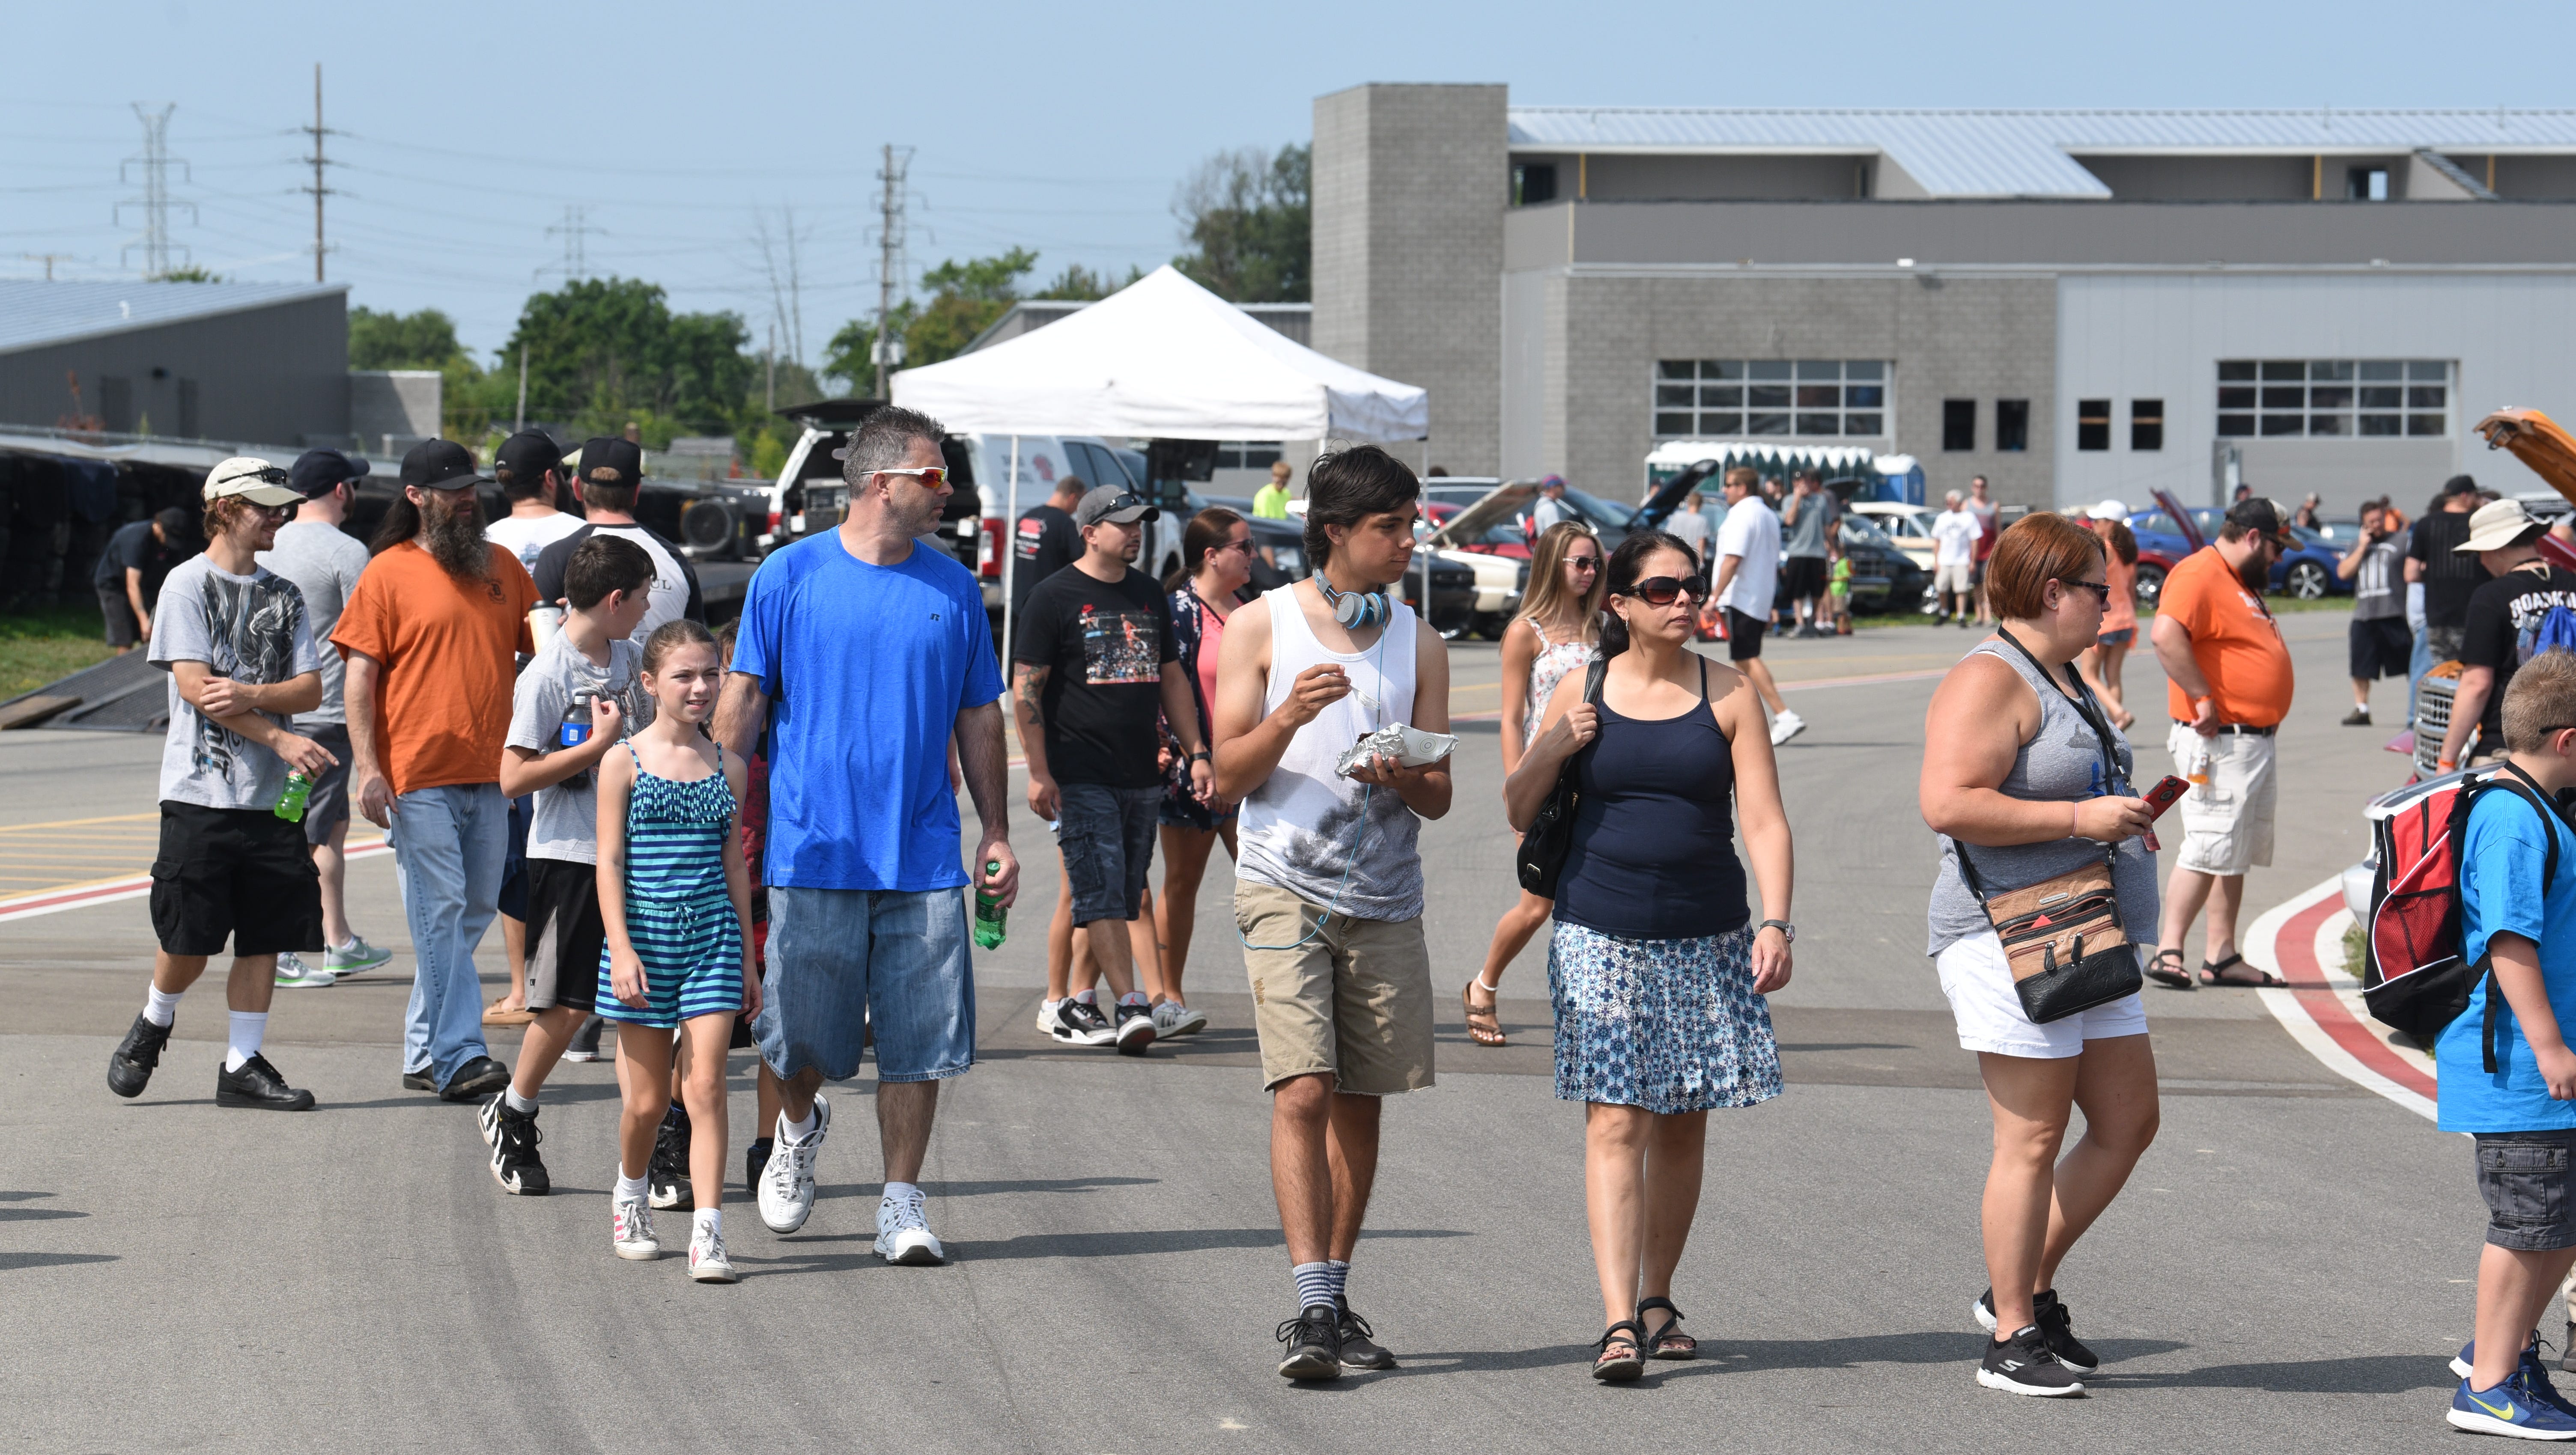 Muscle cars fans attended the Roadkill Nights event held at M1 Concourse in Pontiac on Saturday, August 11, 2018